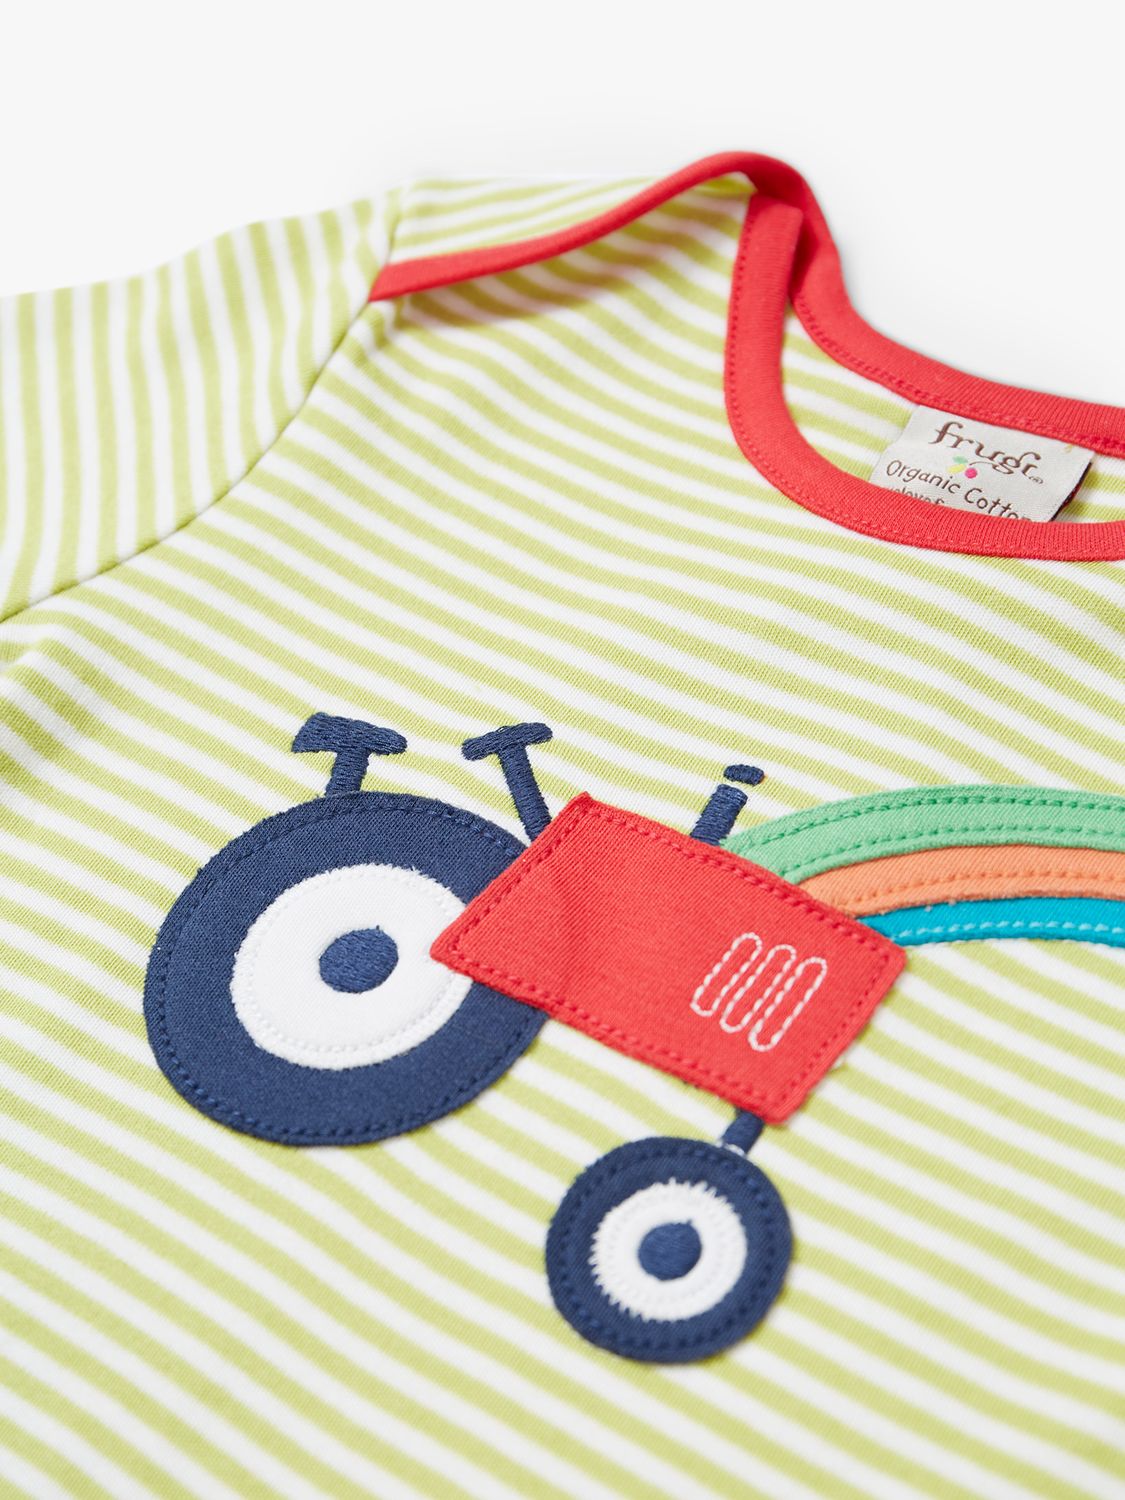 Frugi Baby Bobster Organic Cotton Tractor Applique T-Shirt, Pear/Multi, 0-3 months